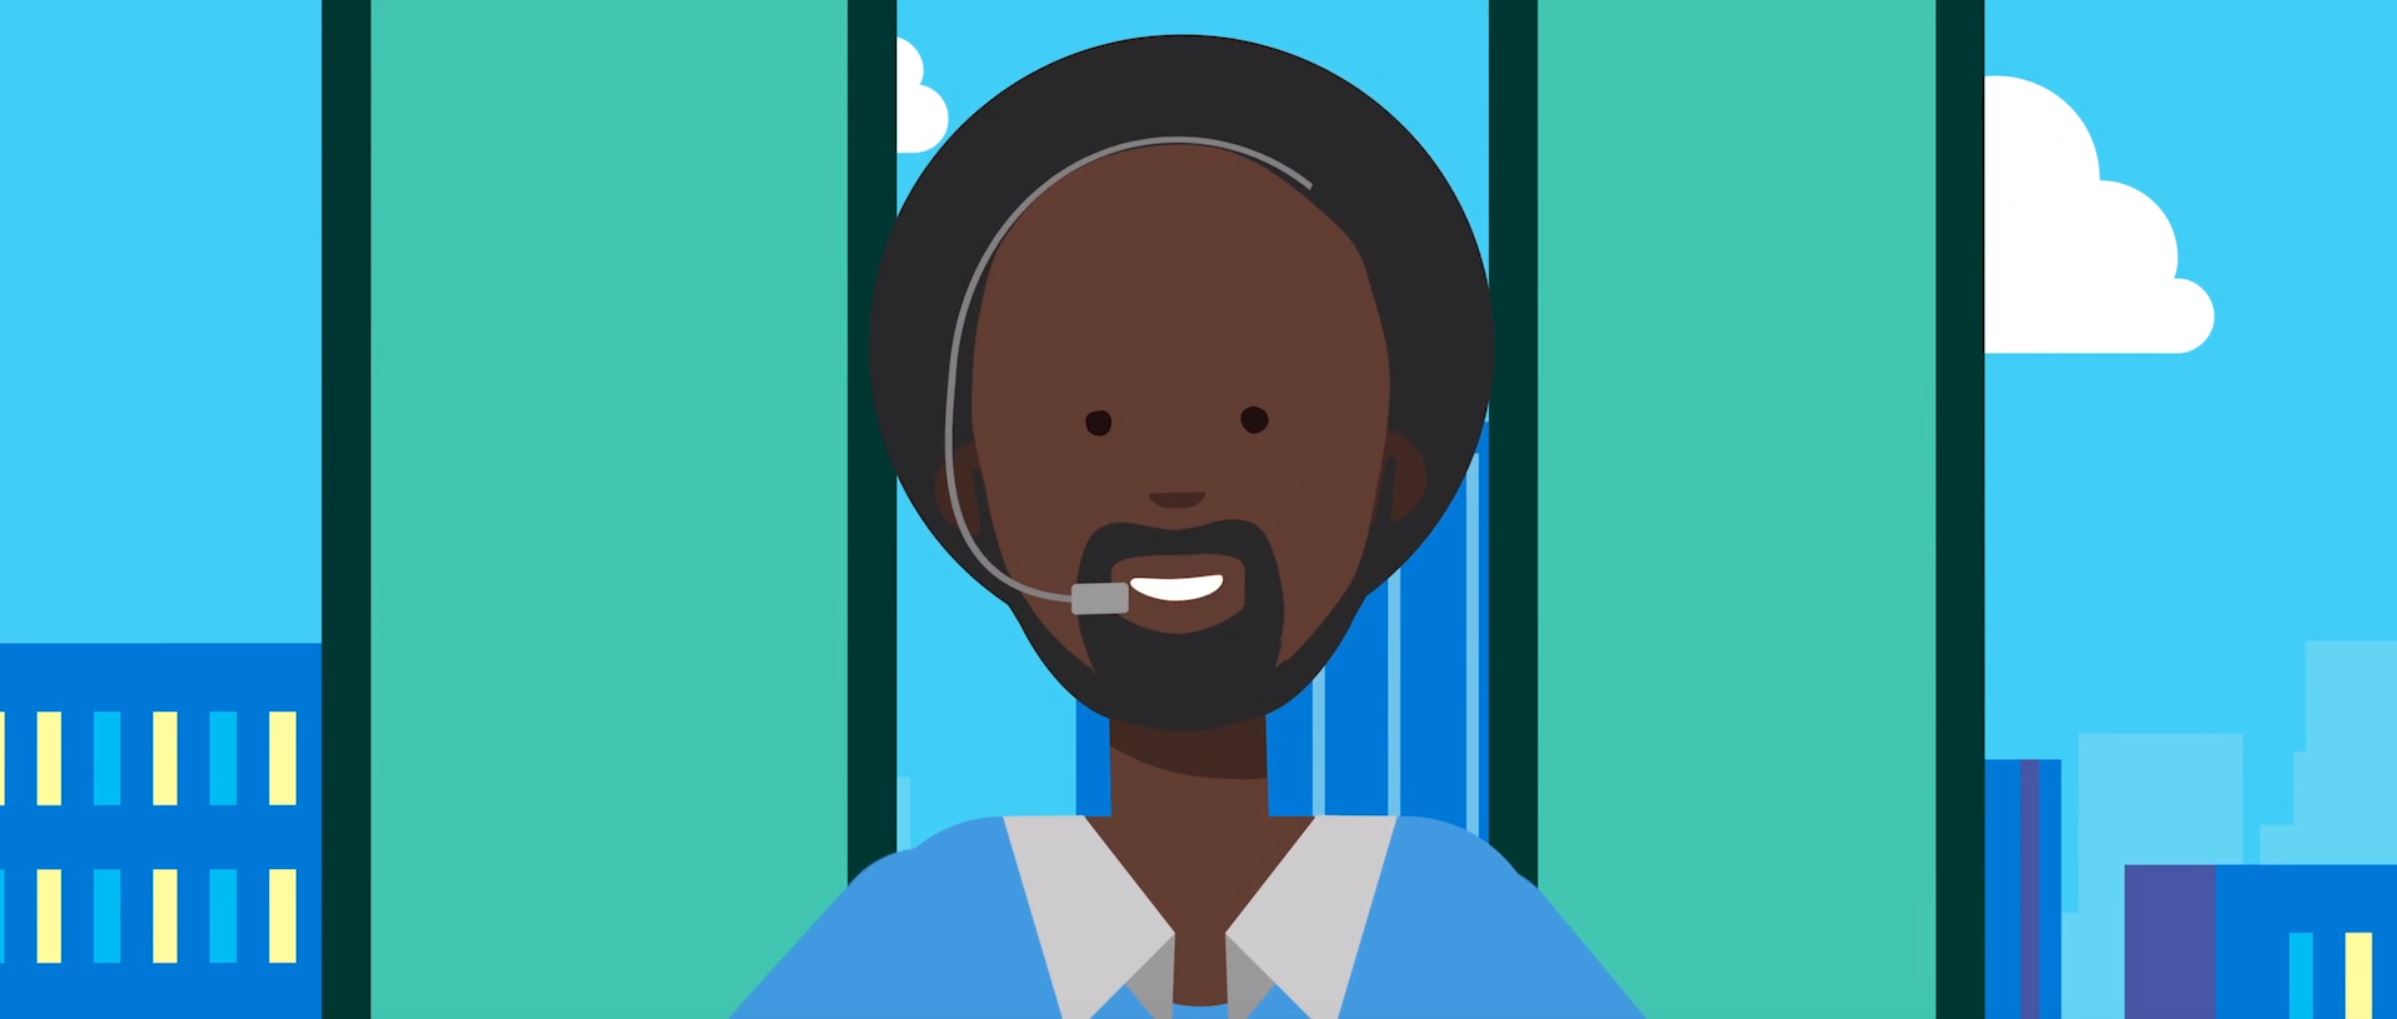 2D character animation image 10 for Microsoft Innovation - manufacturing project